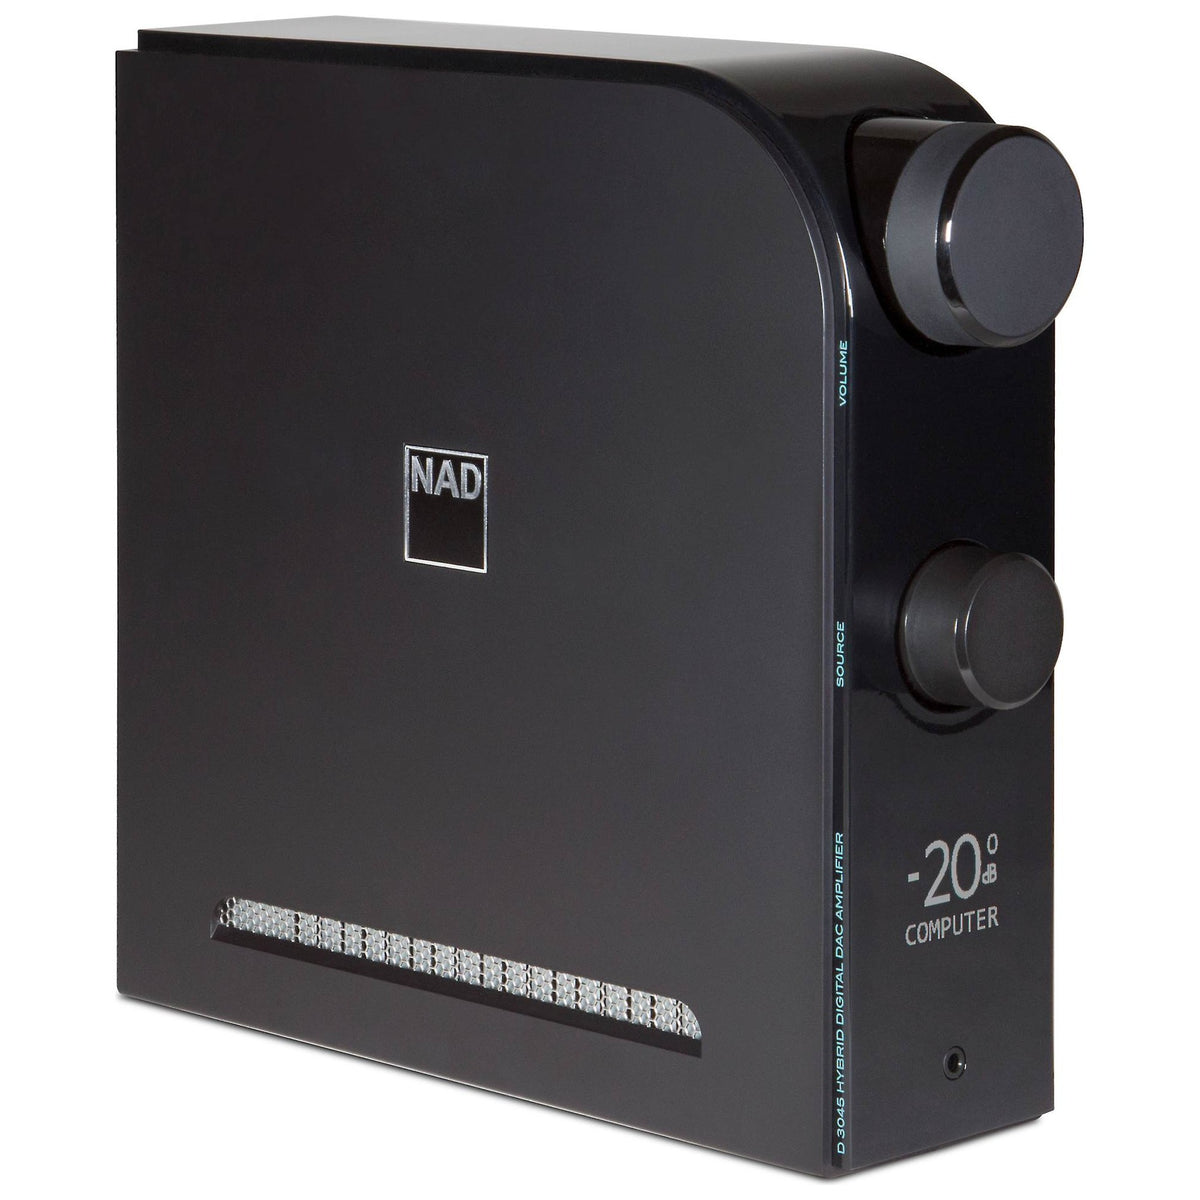 NAD D 3045 Integrated amplifier with built-in DAC and Bluetooth